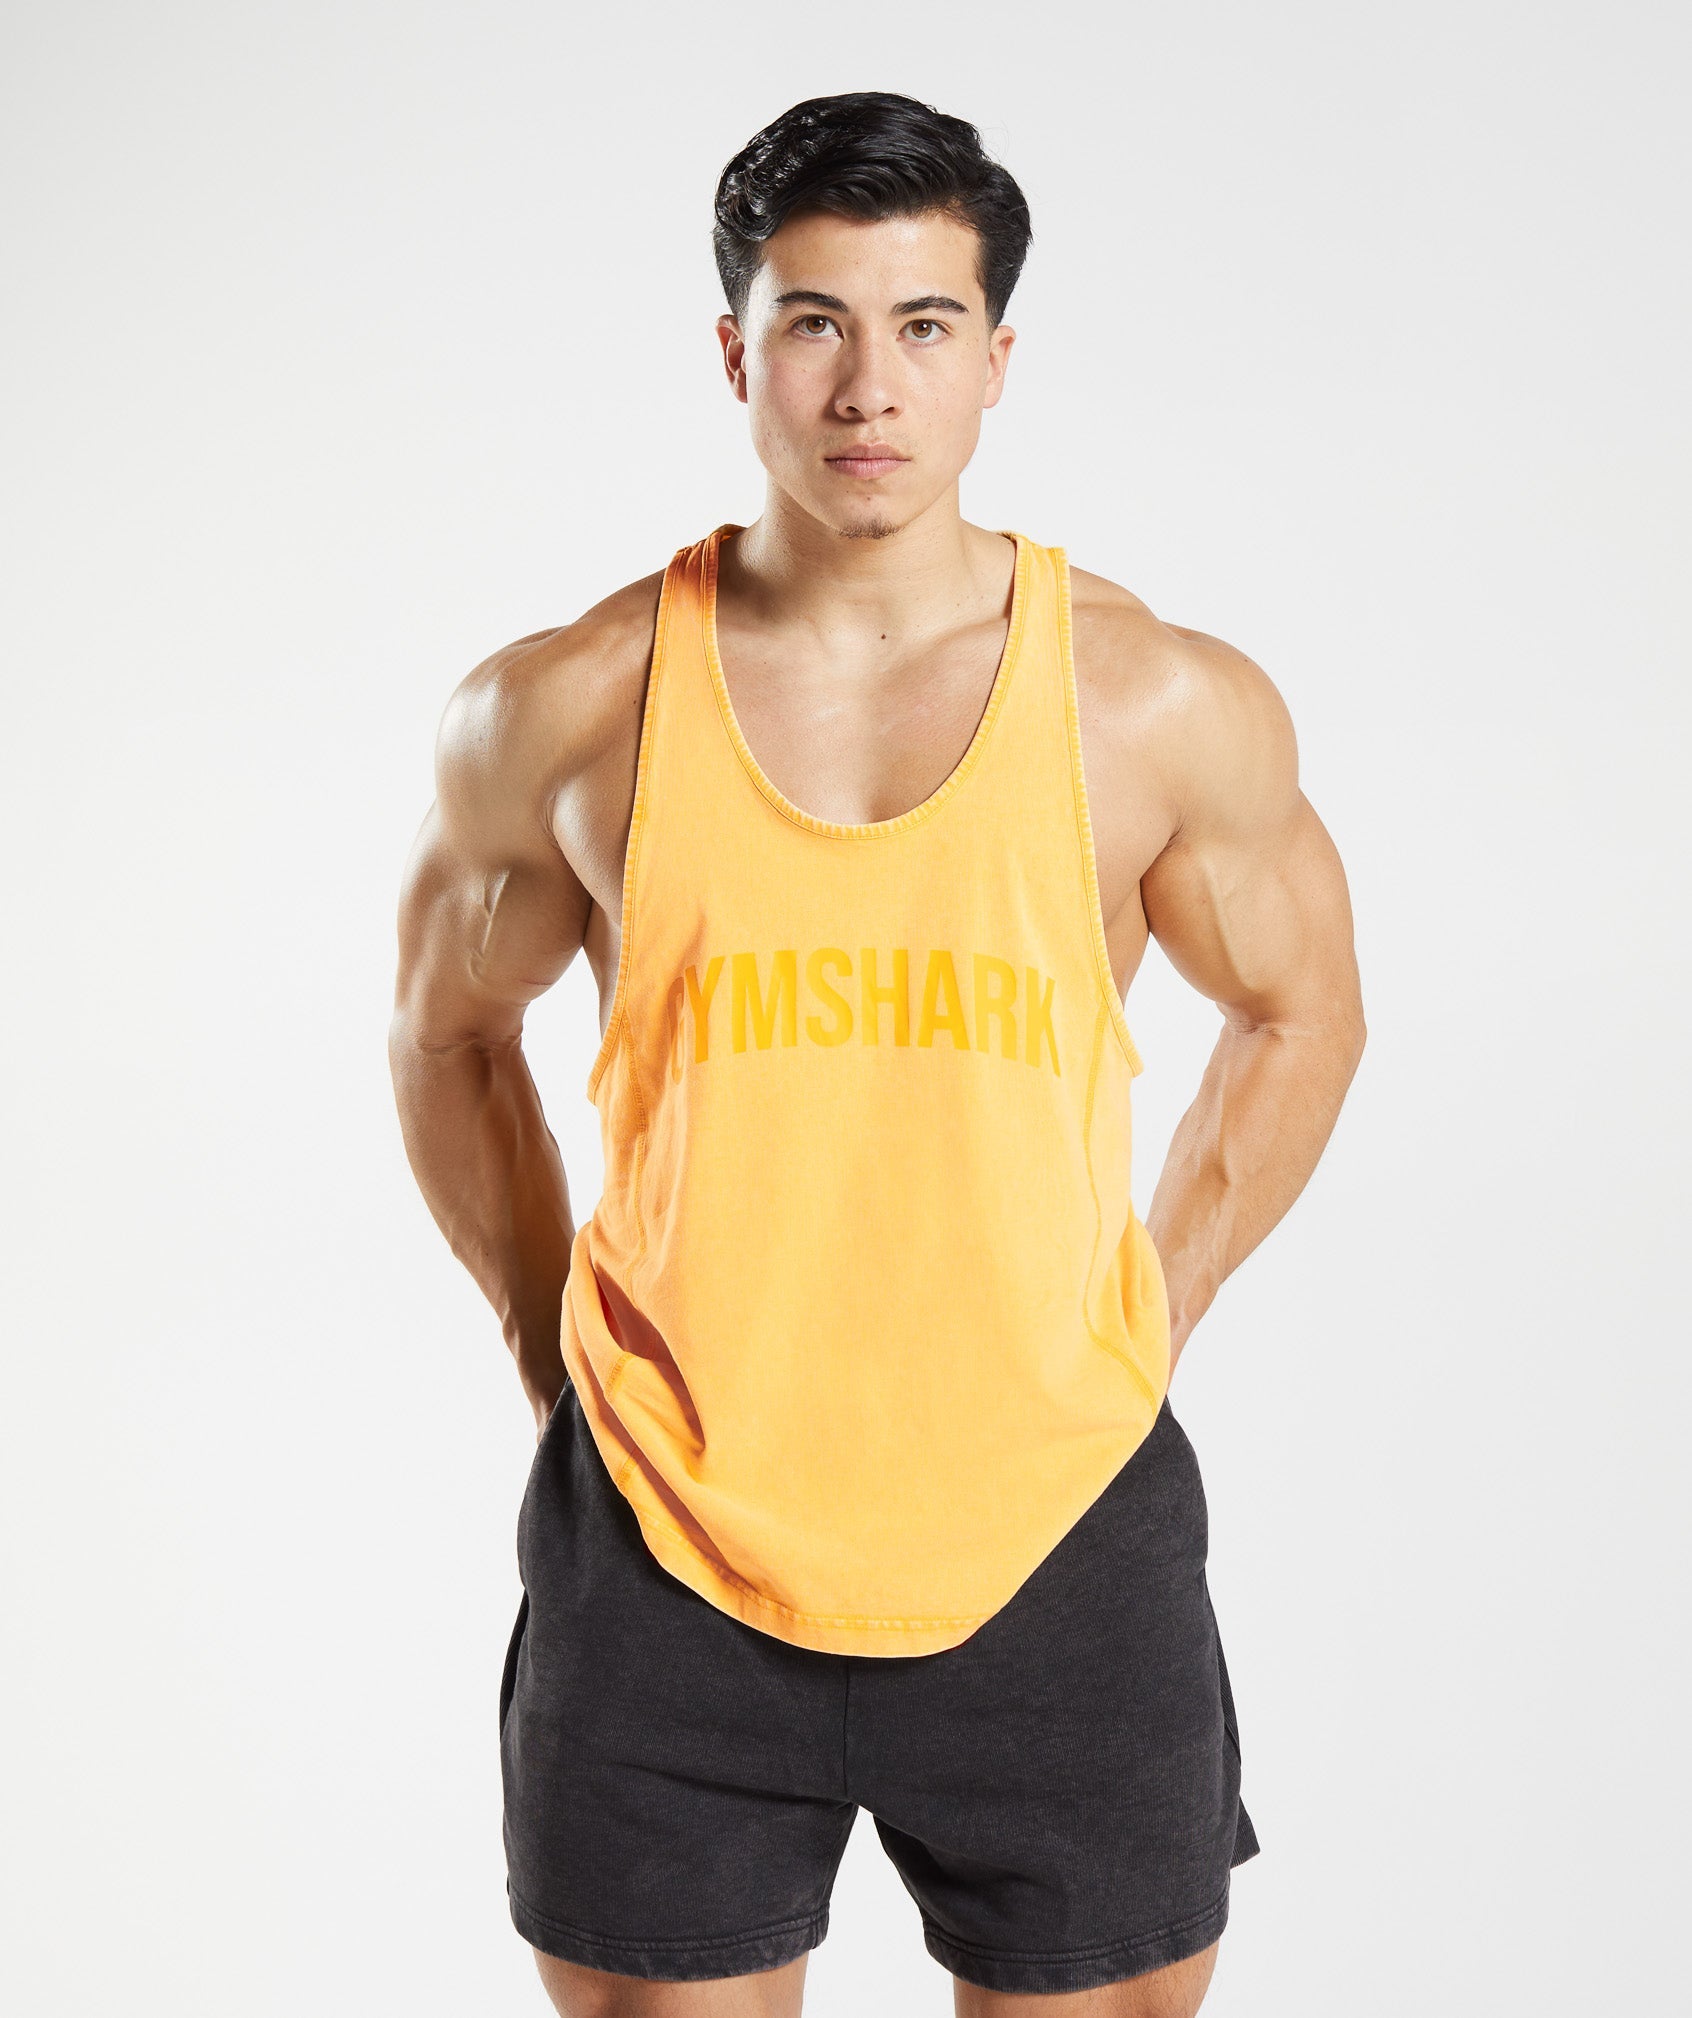 Gymshark on X: GymShark Fan looking epic in the LoudMouth Yellow